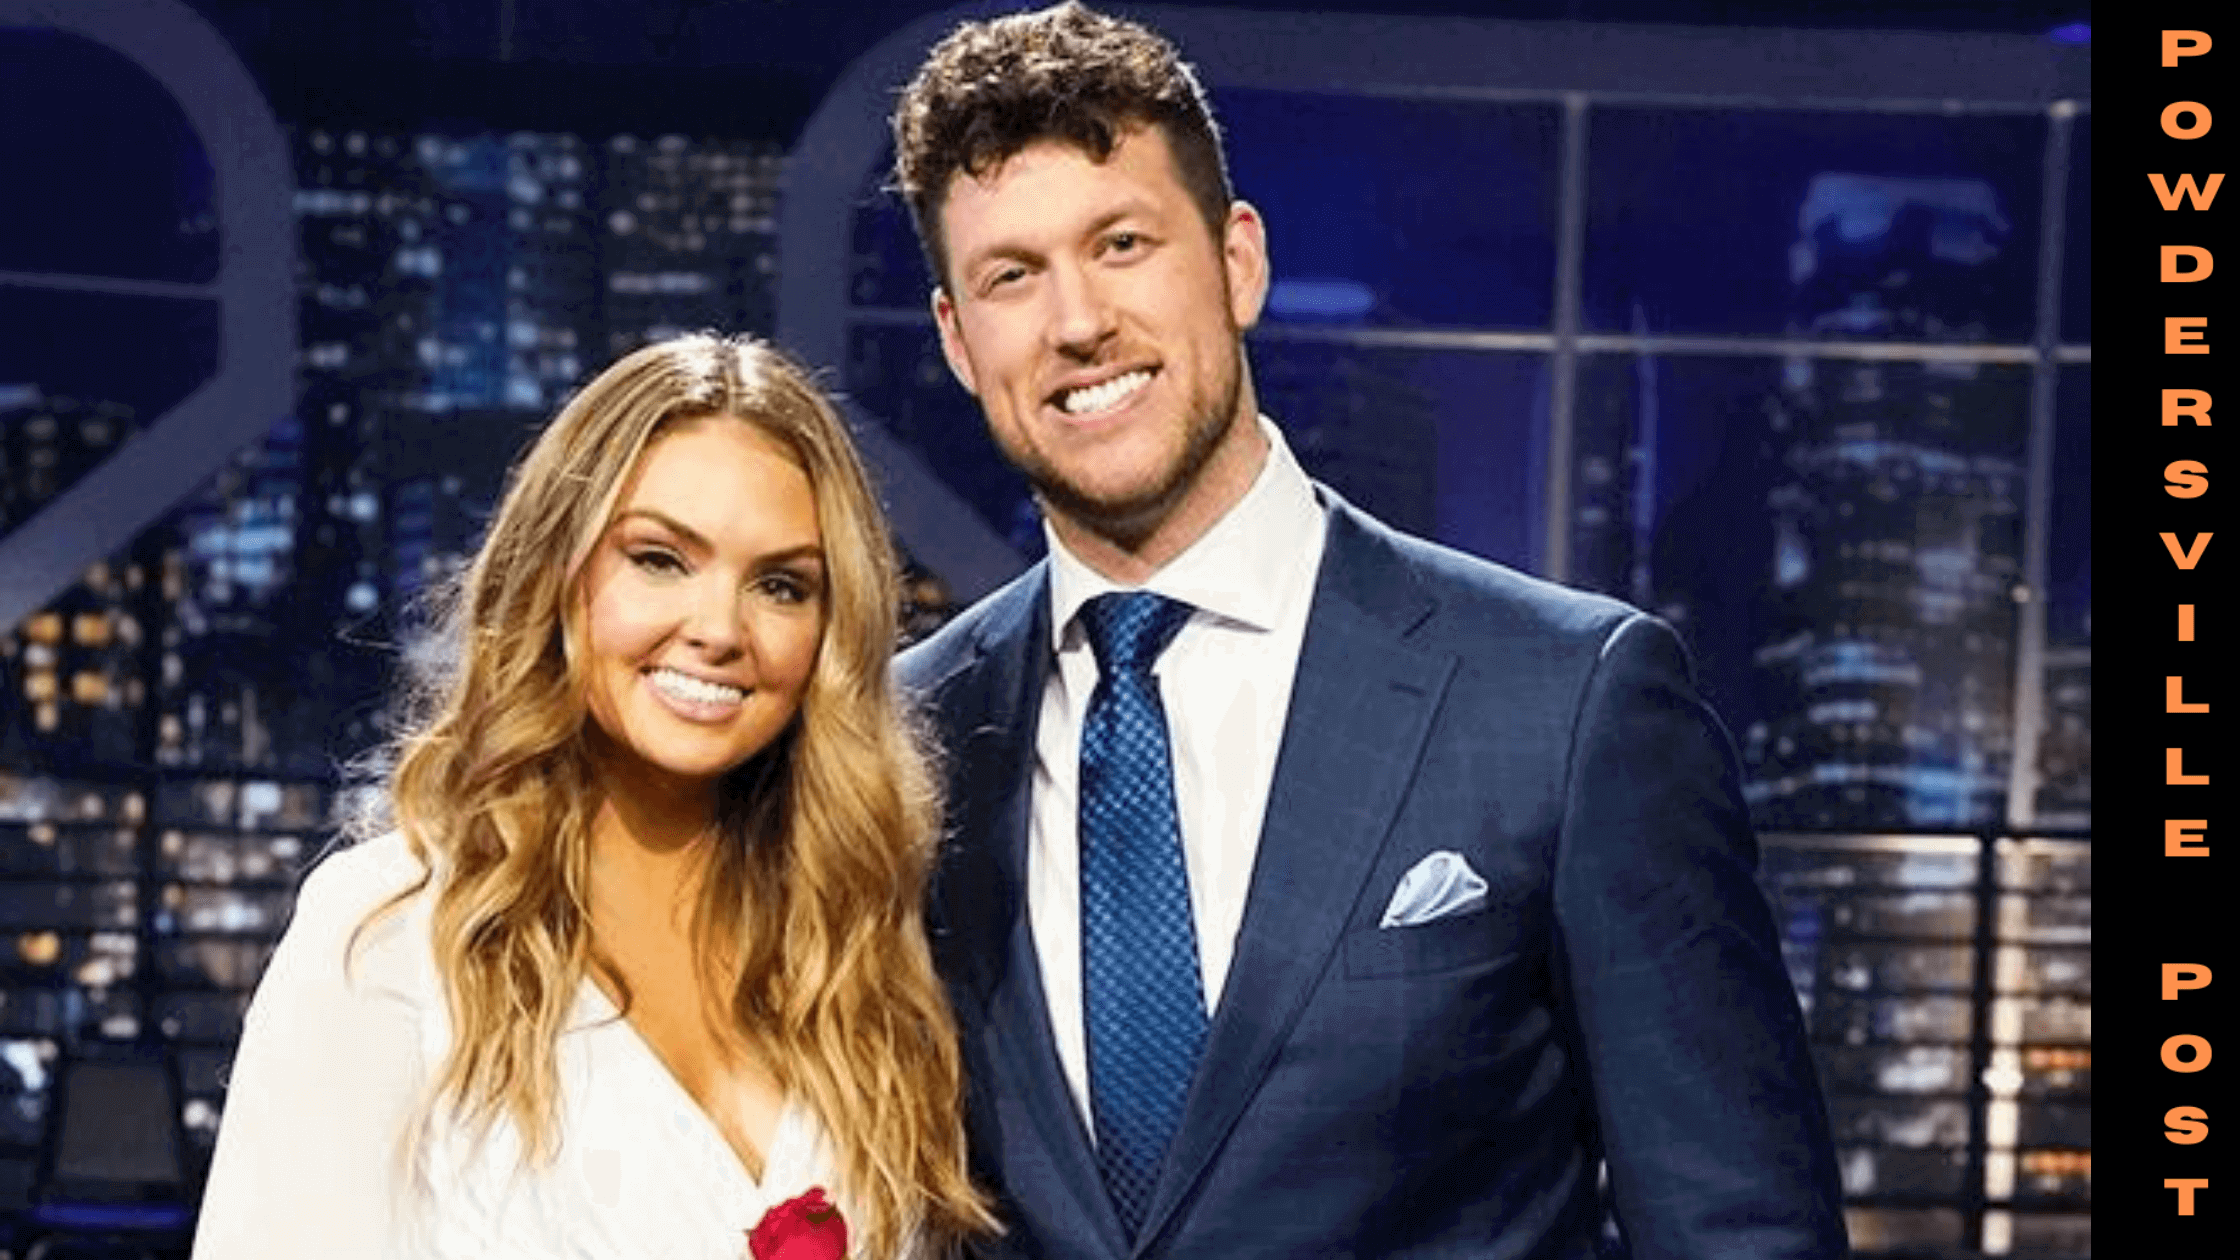 Bachelor Stars Clayton Echard And Susie Evans Share Why He Selected An Engagement Ring To Propose Her